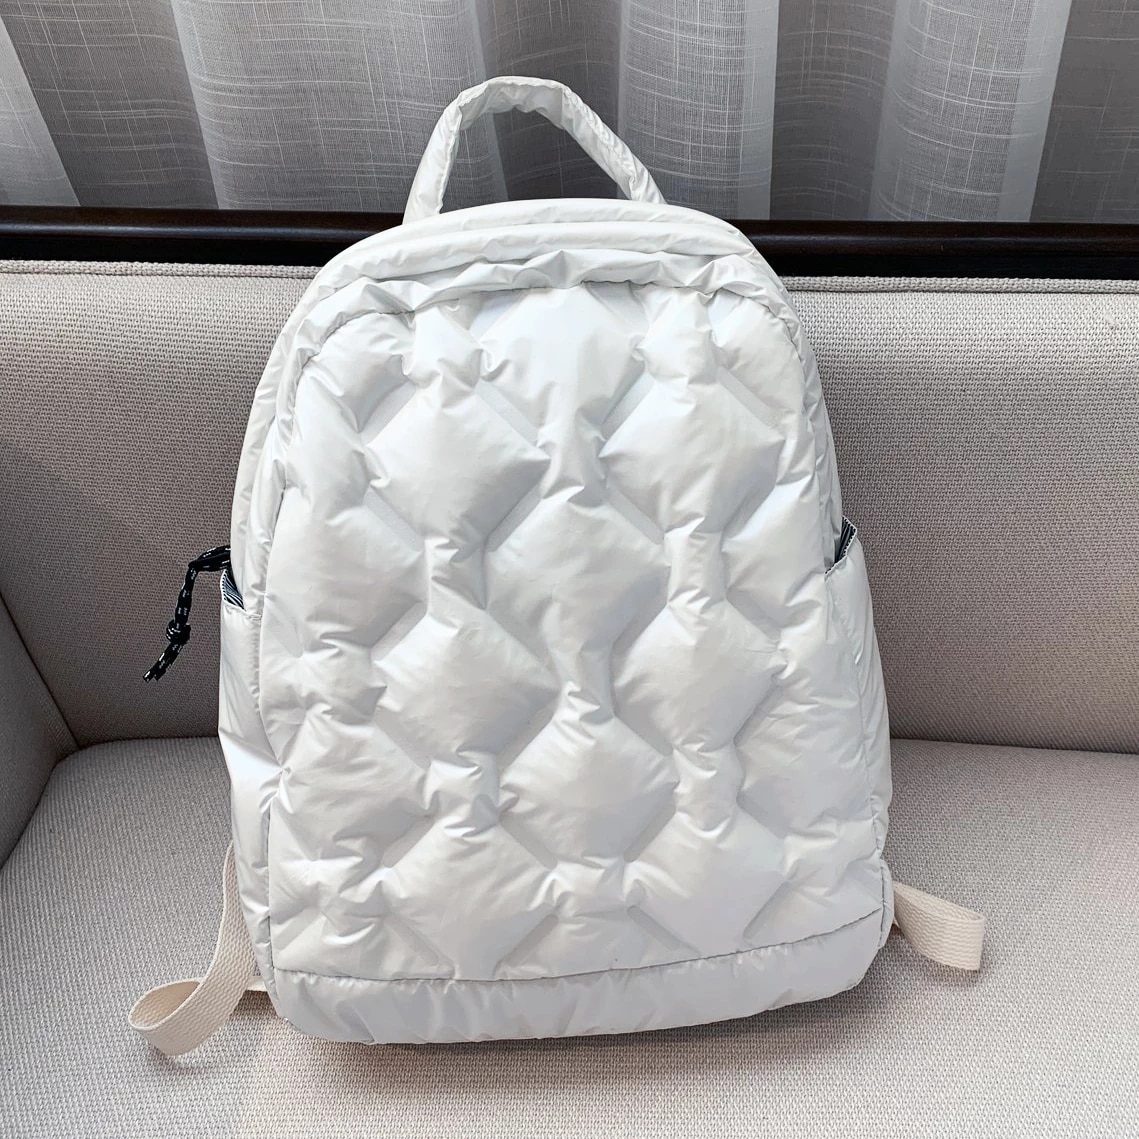 Ultralight Winter Warm Space Down Backpack Women School Backpack Bags for Girls Fashion Trend Lightweight Cotton Travel Bags